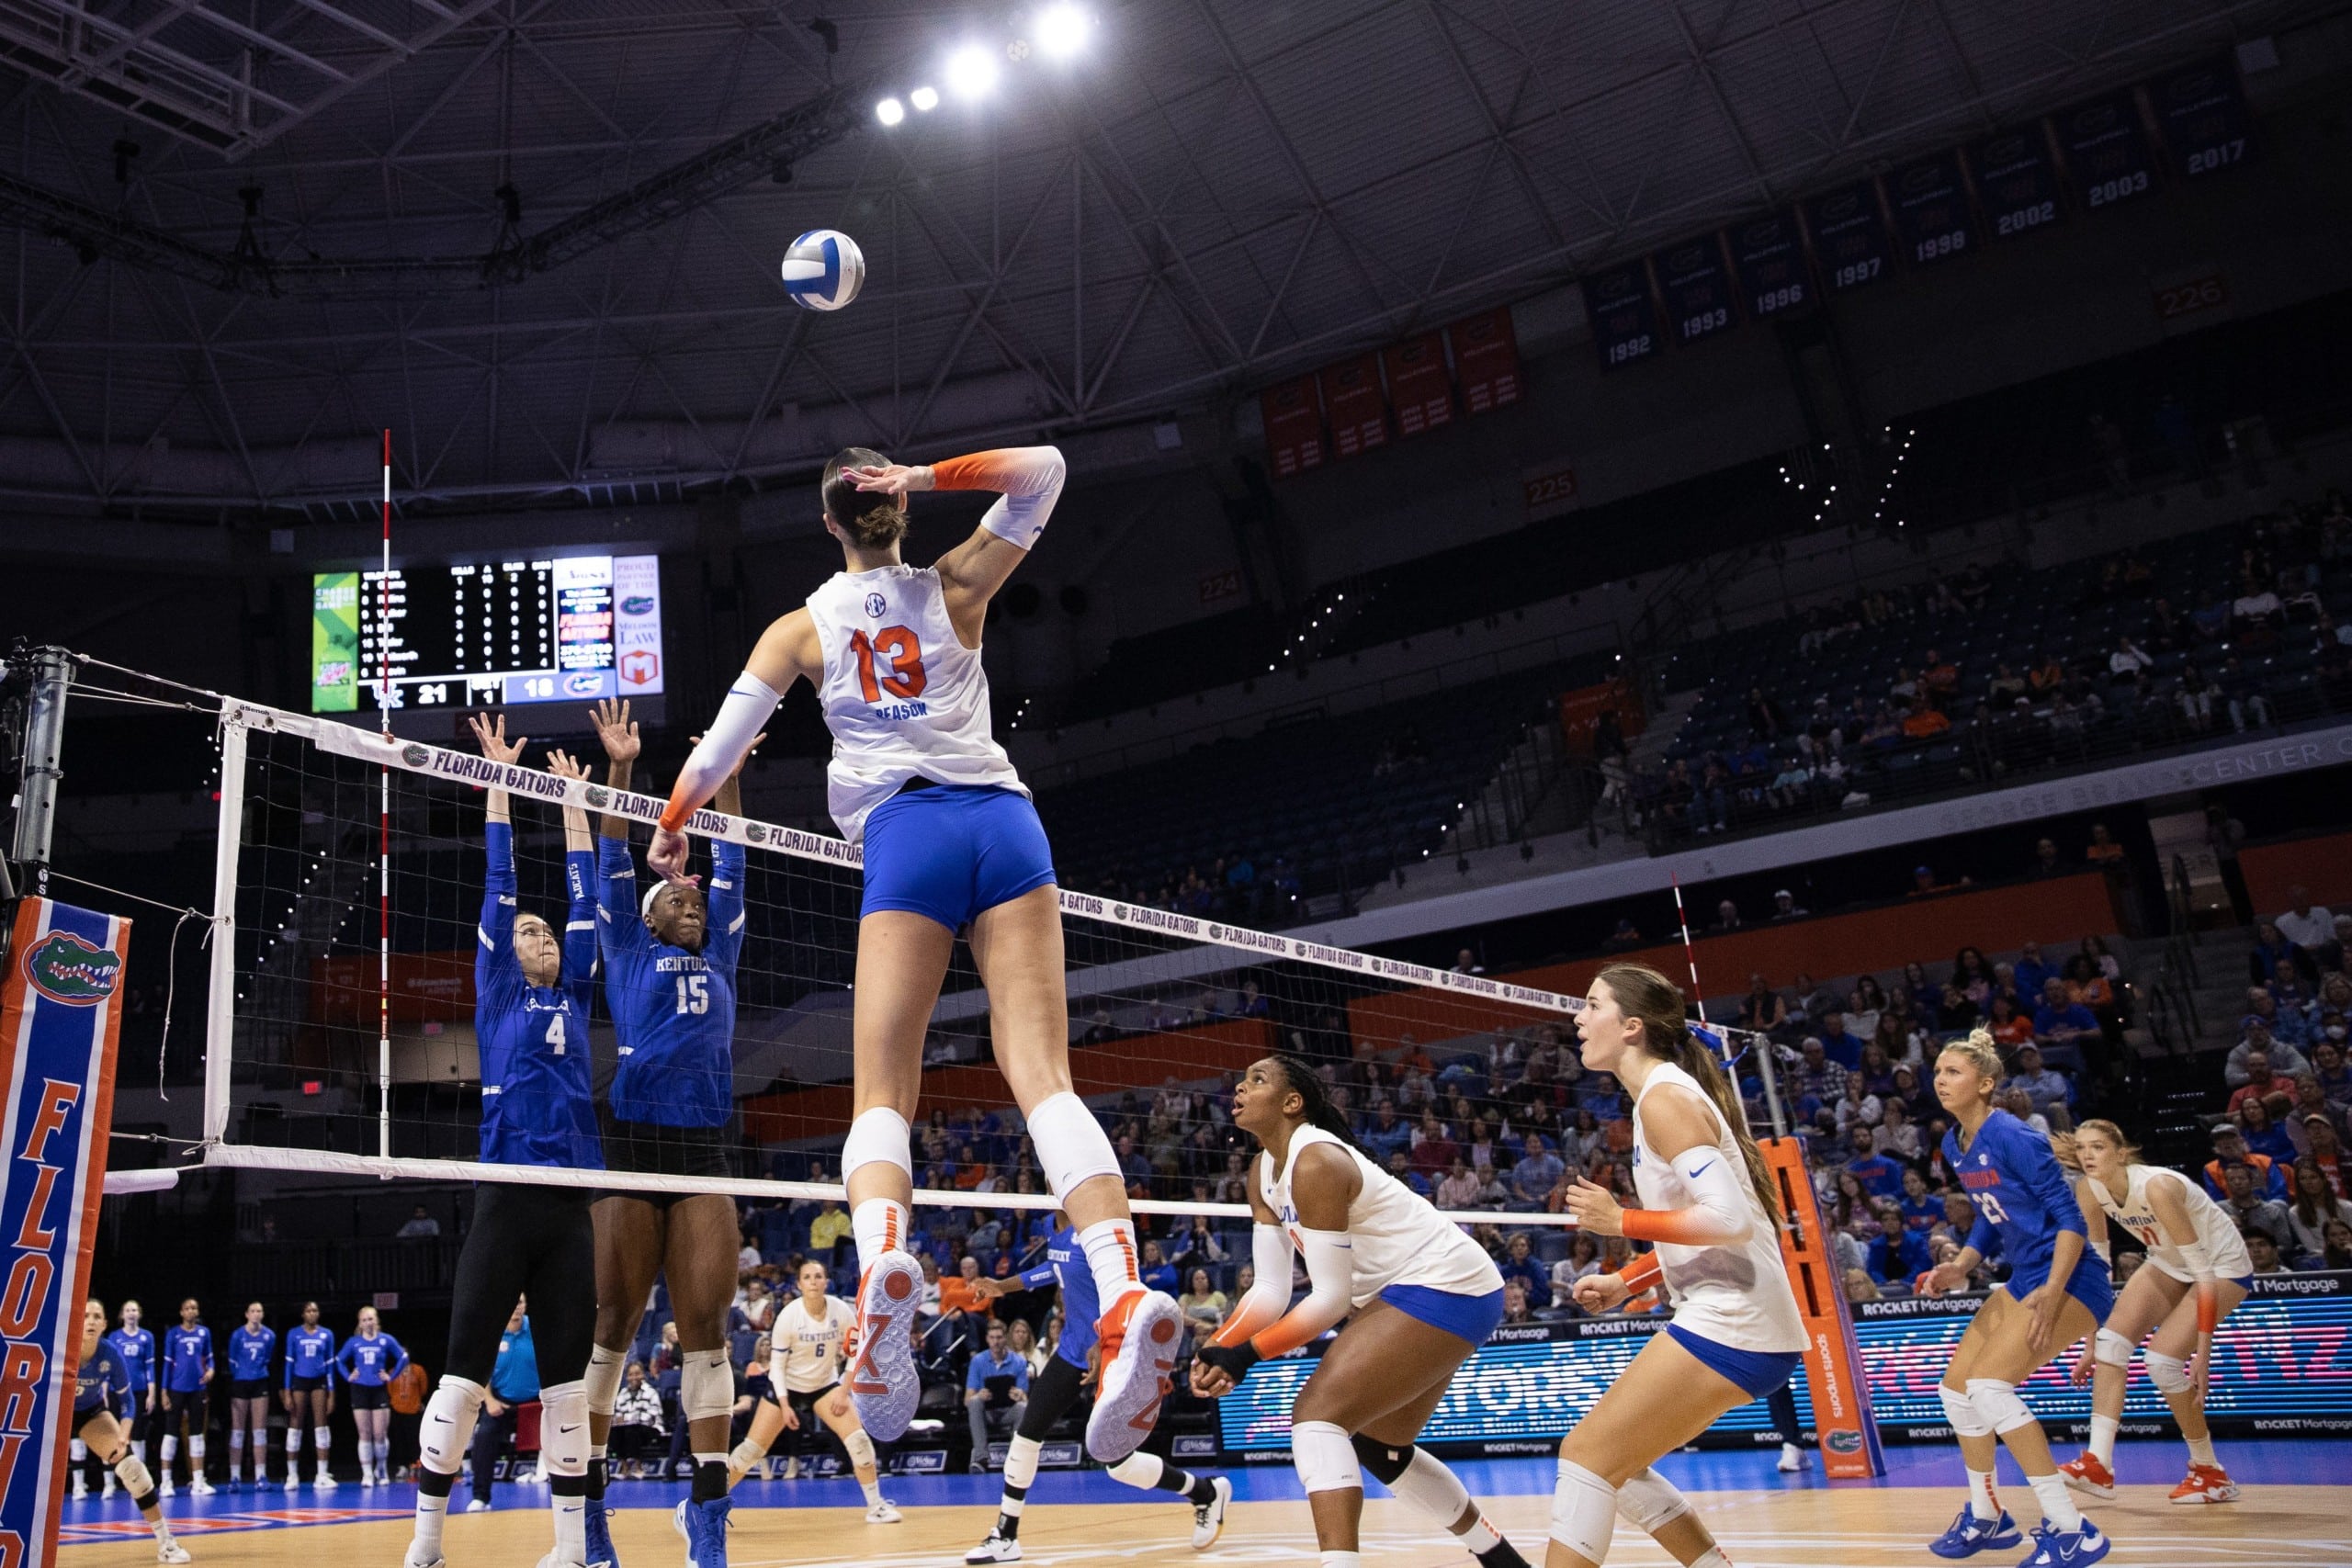 Florida Gators women's volleyball player prepares to spike ball against SEC opponents Kentucky